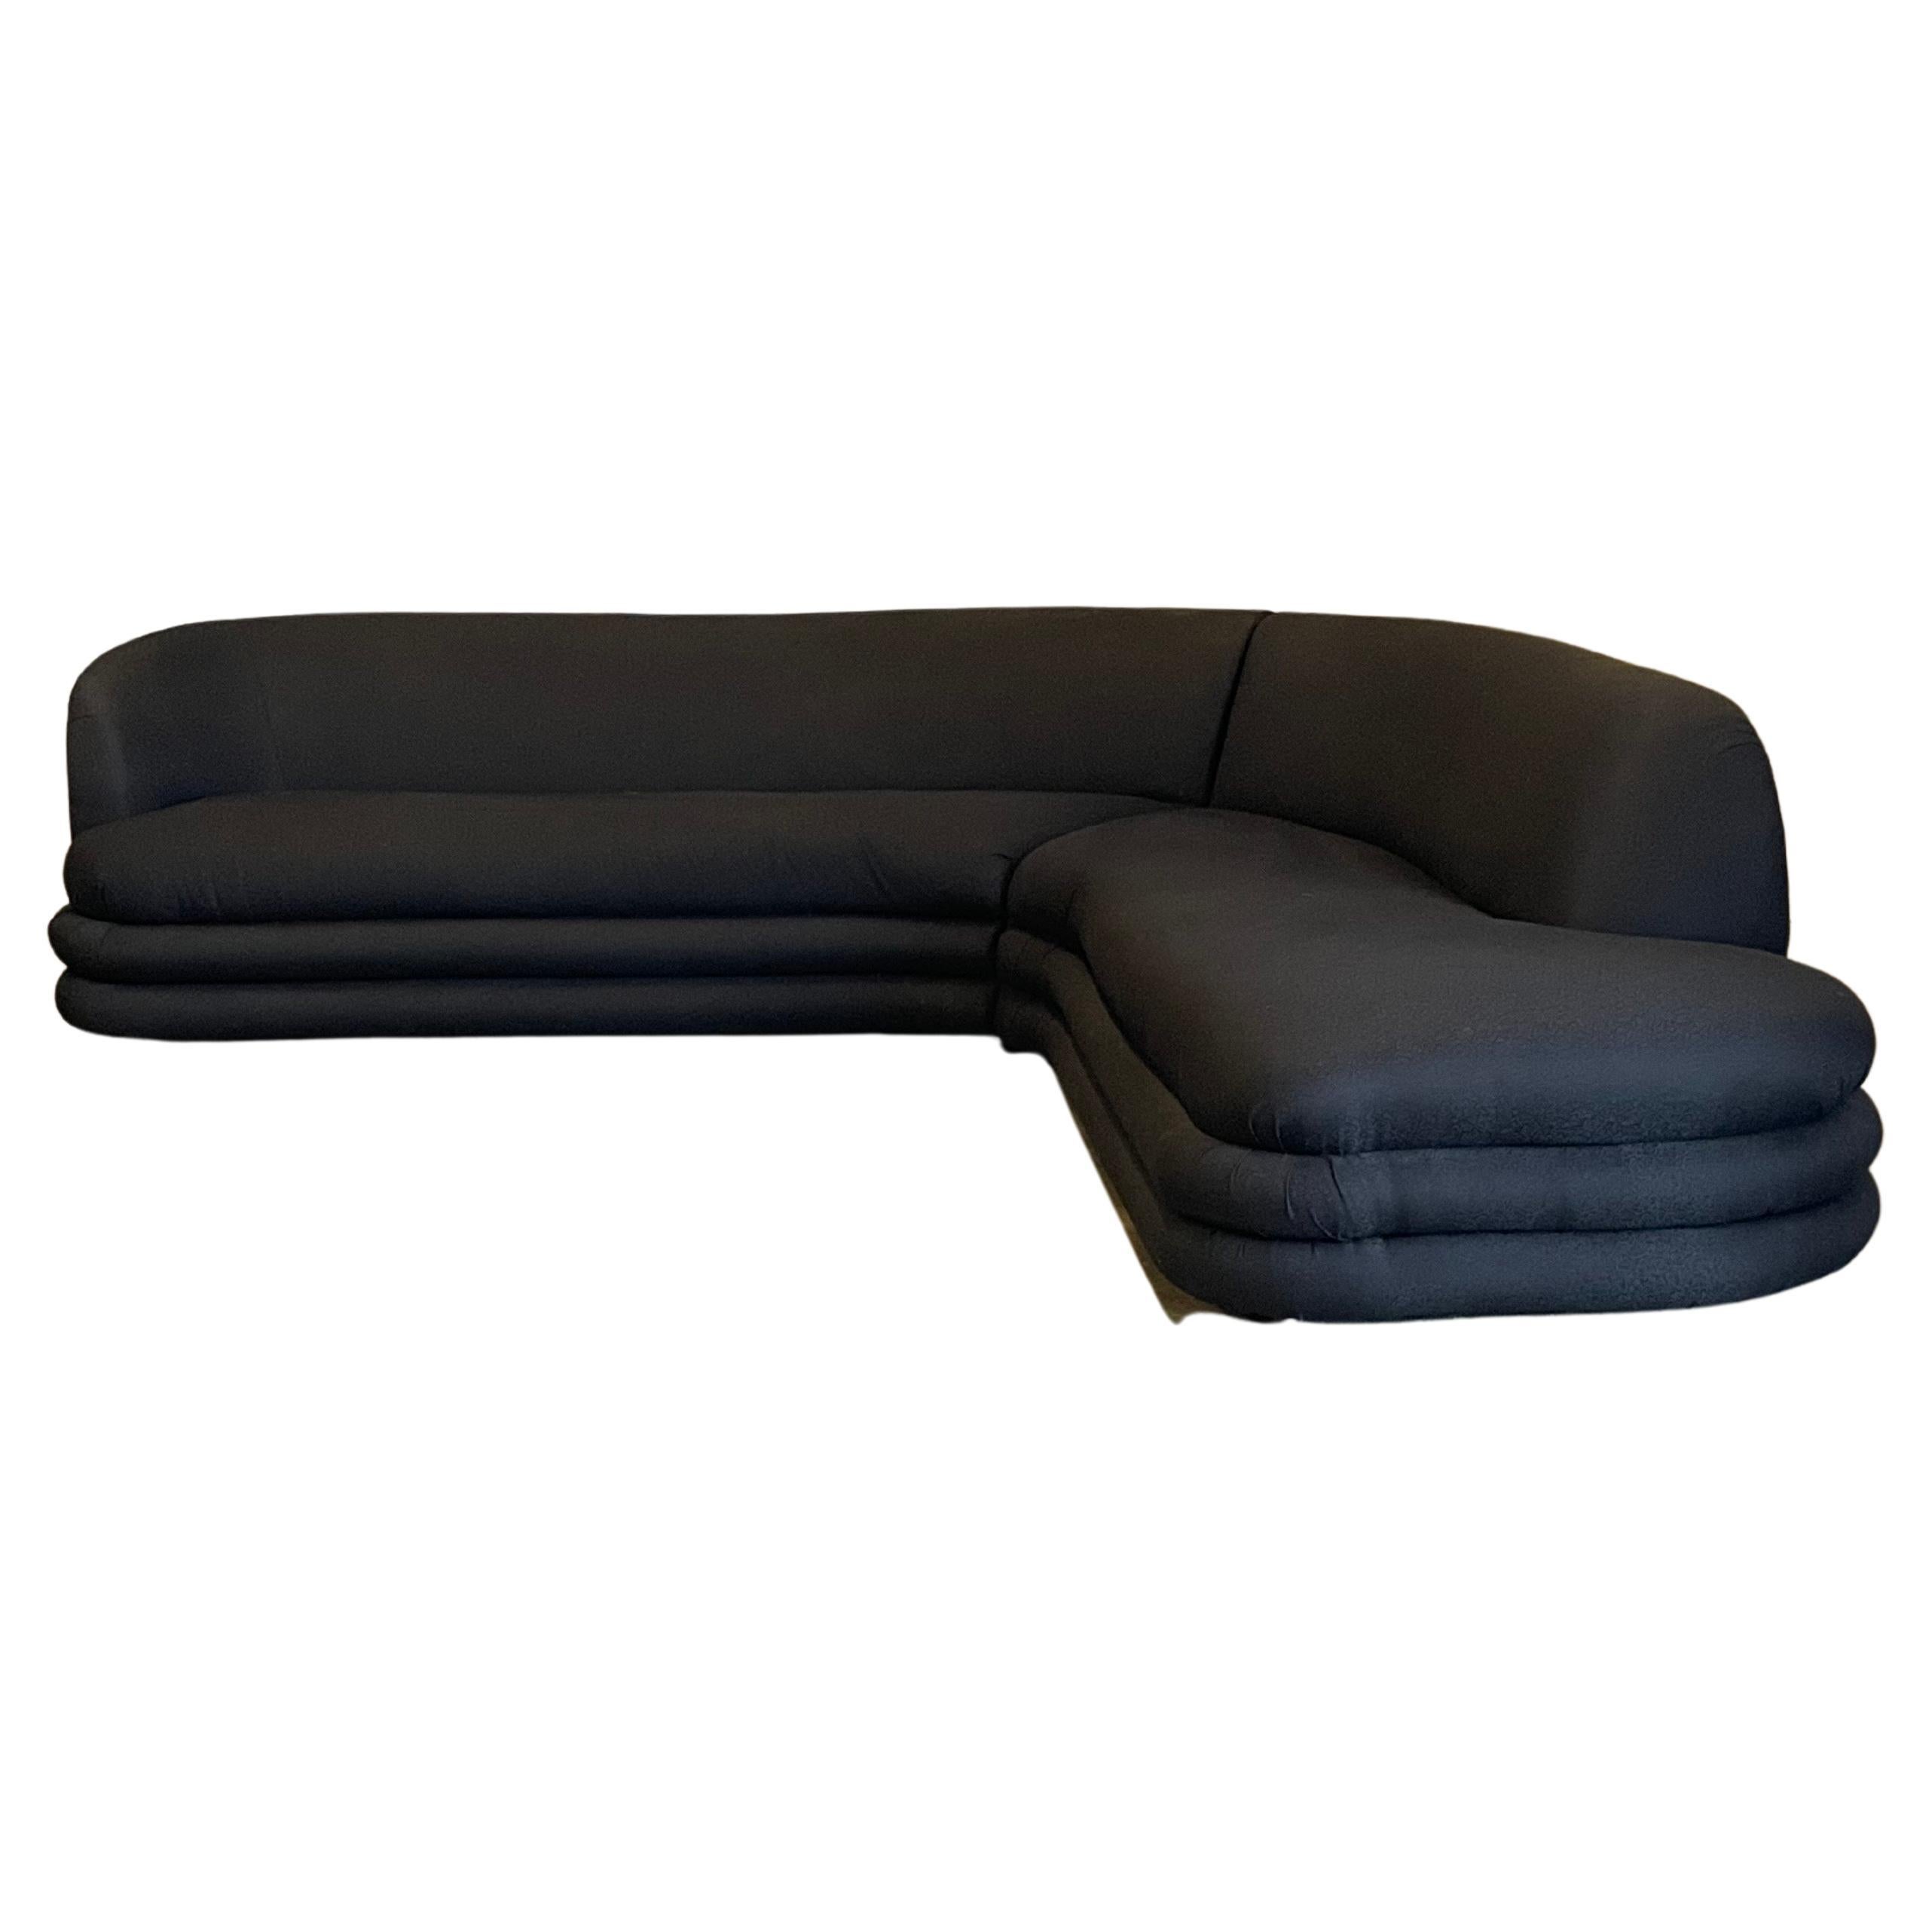 Interesting postmodern style sofa with a serpentine like shape. Great organic L shape sofa with an overall foot print of 106” x 106”. Back height is 29” and seat height is 17.5”. Sofa is composed of two sections. 

Comfortable and pretty, this sofa